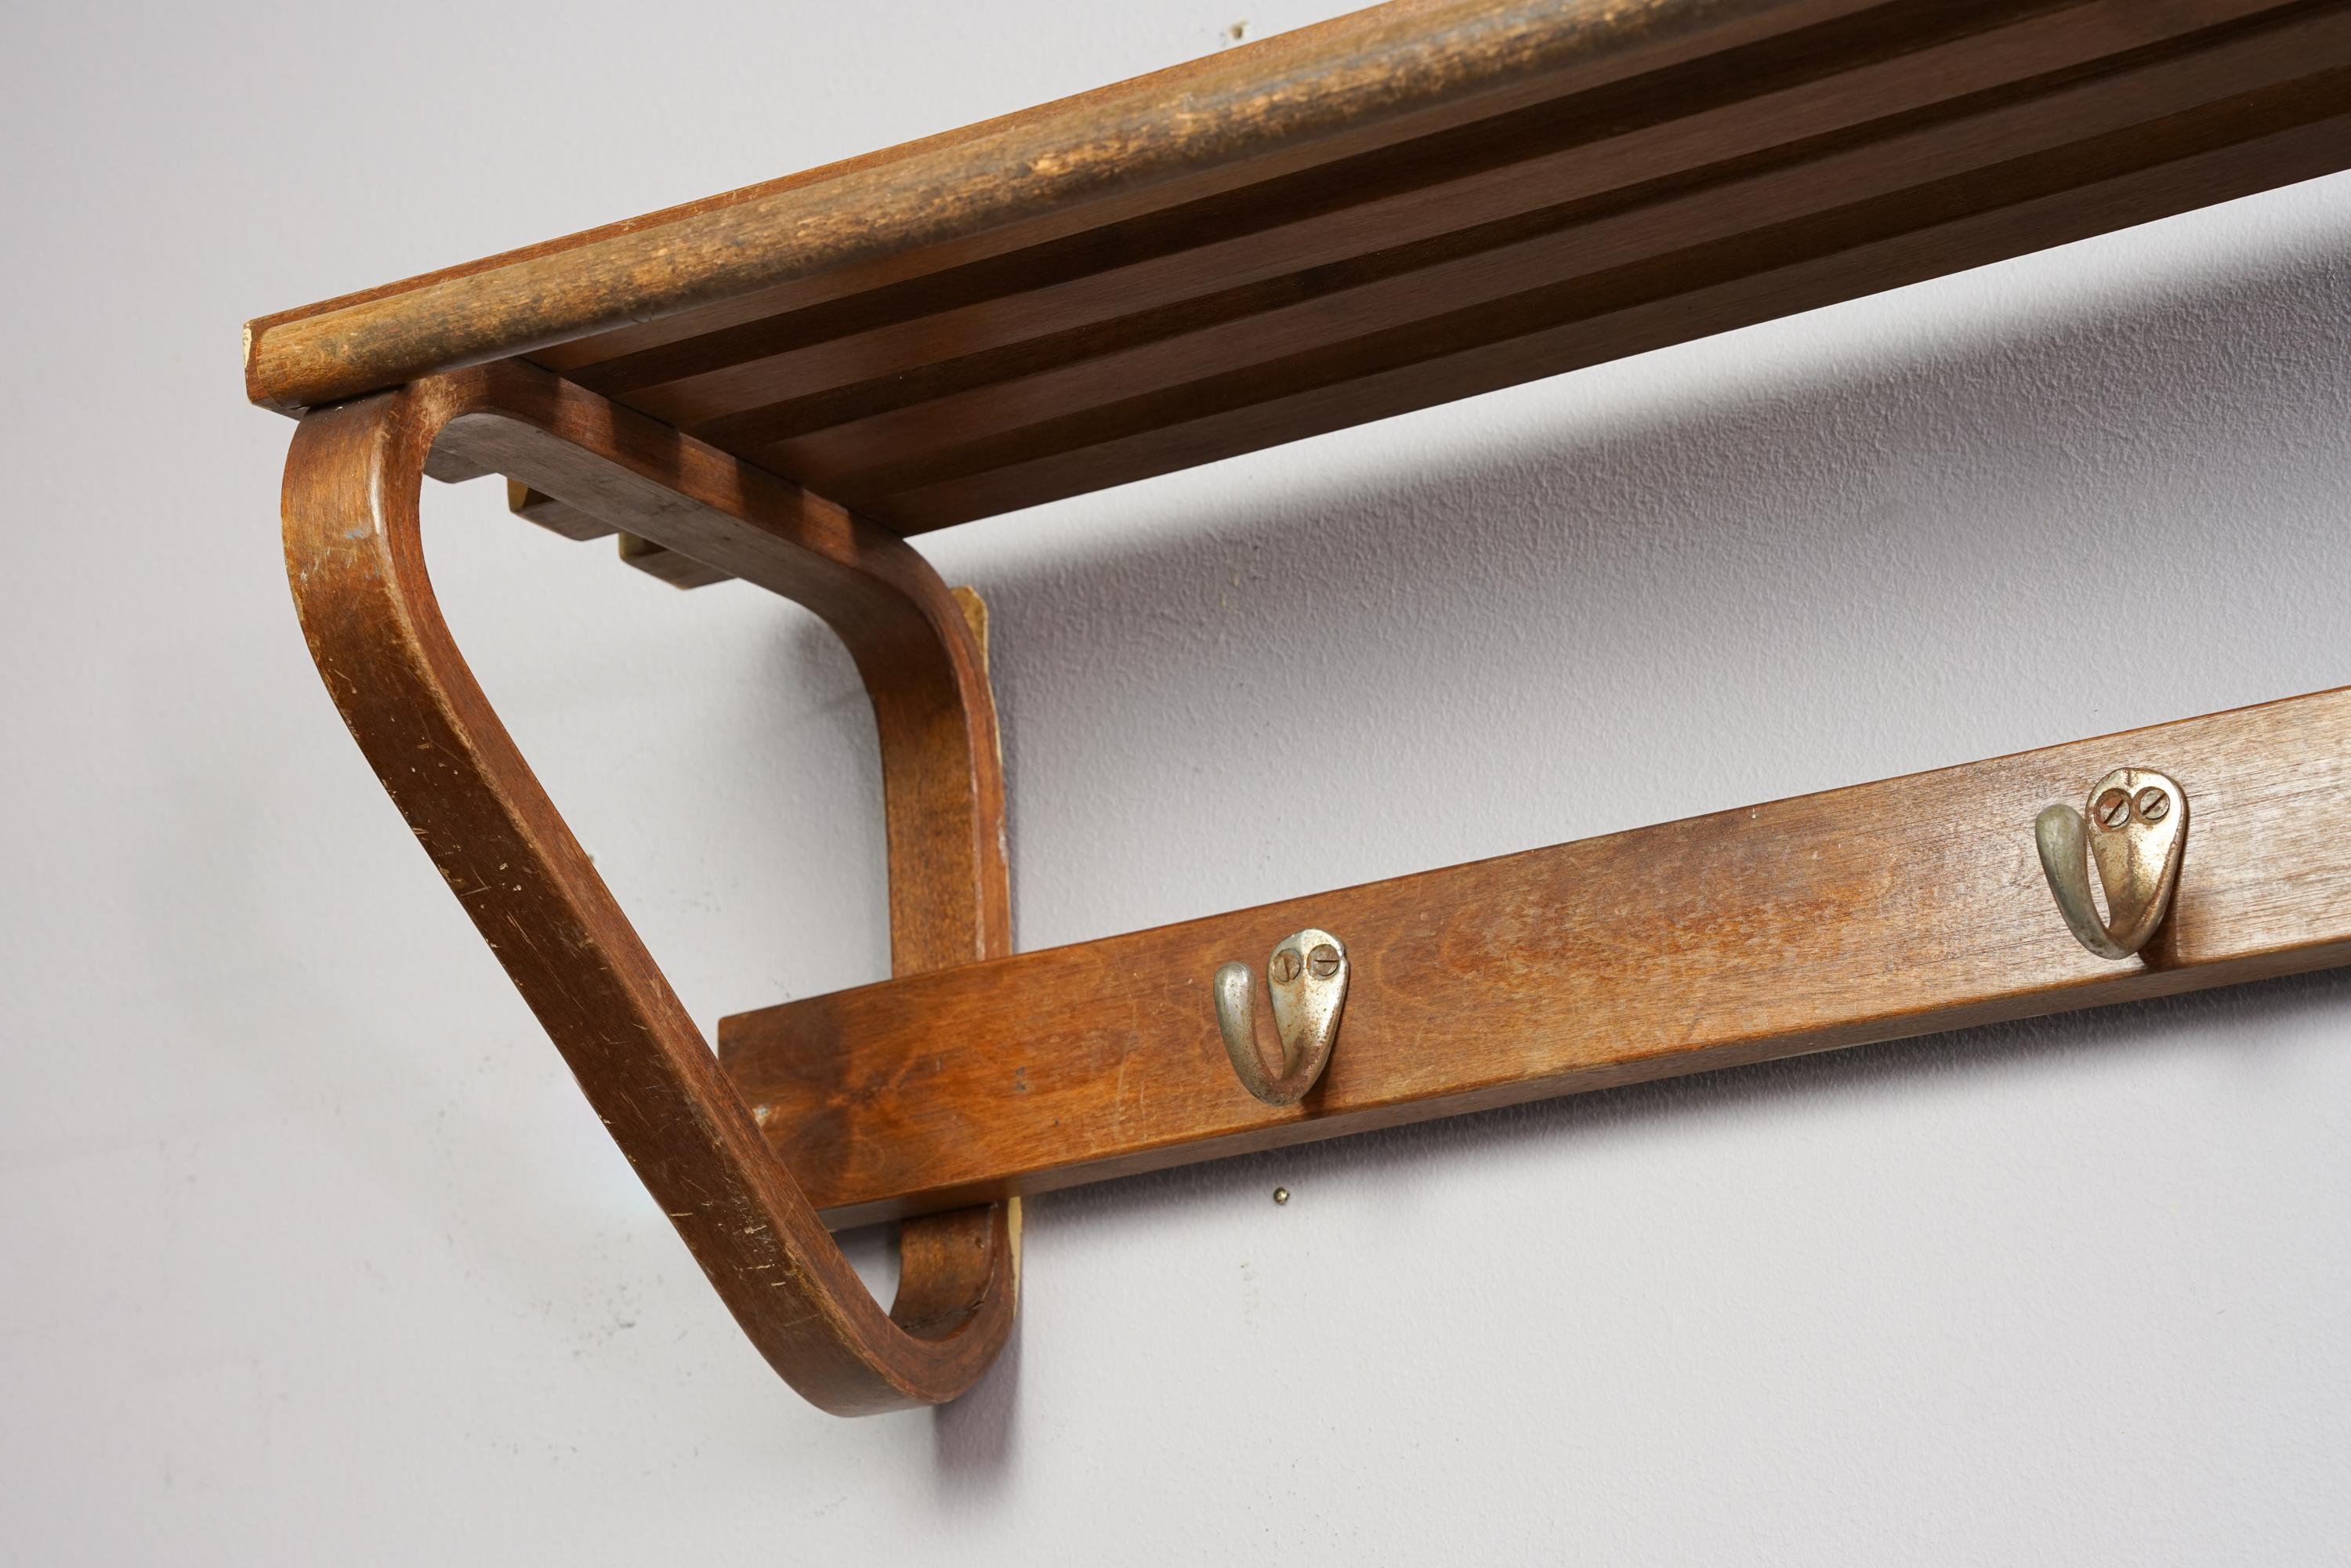 Model 109 Alvar Aalto coat rack from the 1940s. Birch with metal hooks. Good vintage condition, wear consistent with age and use. Iconic Alvar Aalto design.